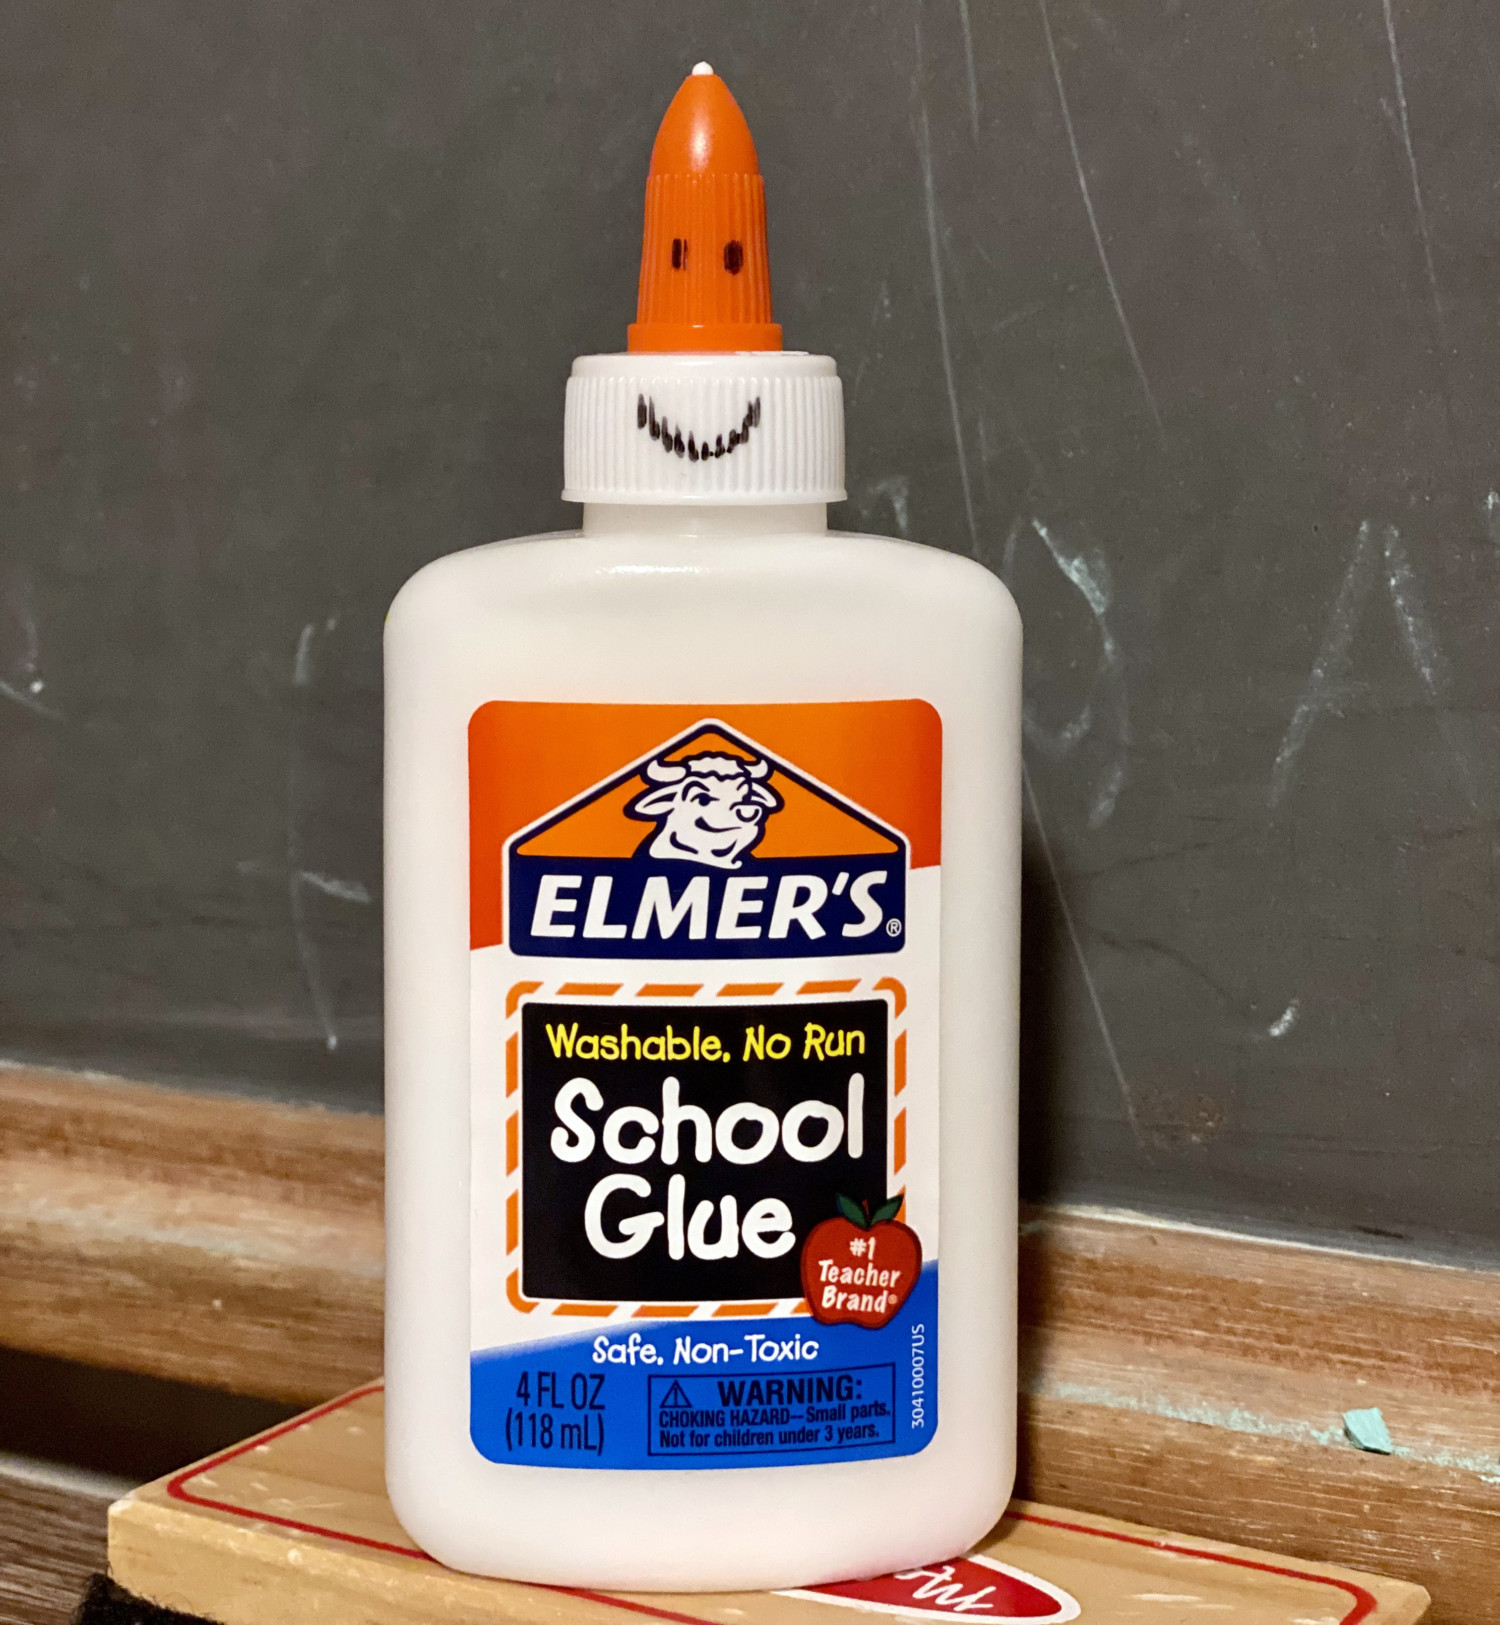 Clever Glue Hack Uses Smiley Faces To Remind Kids To Close The Top